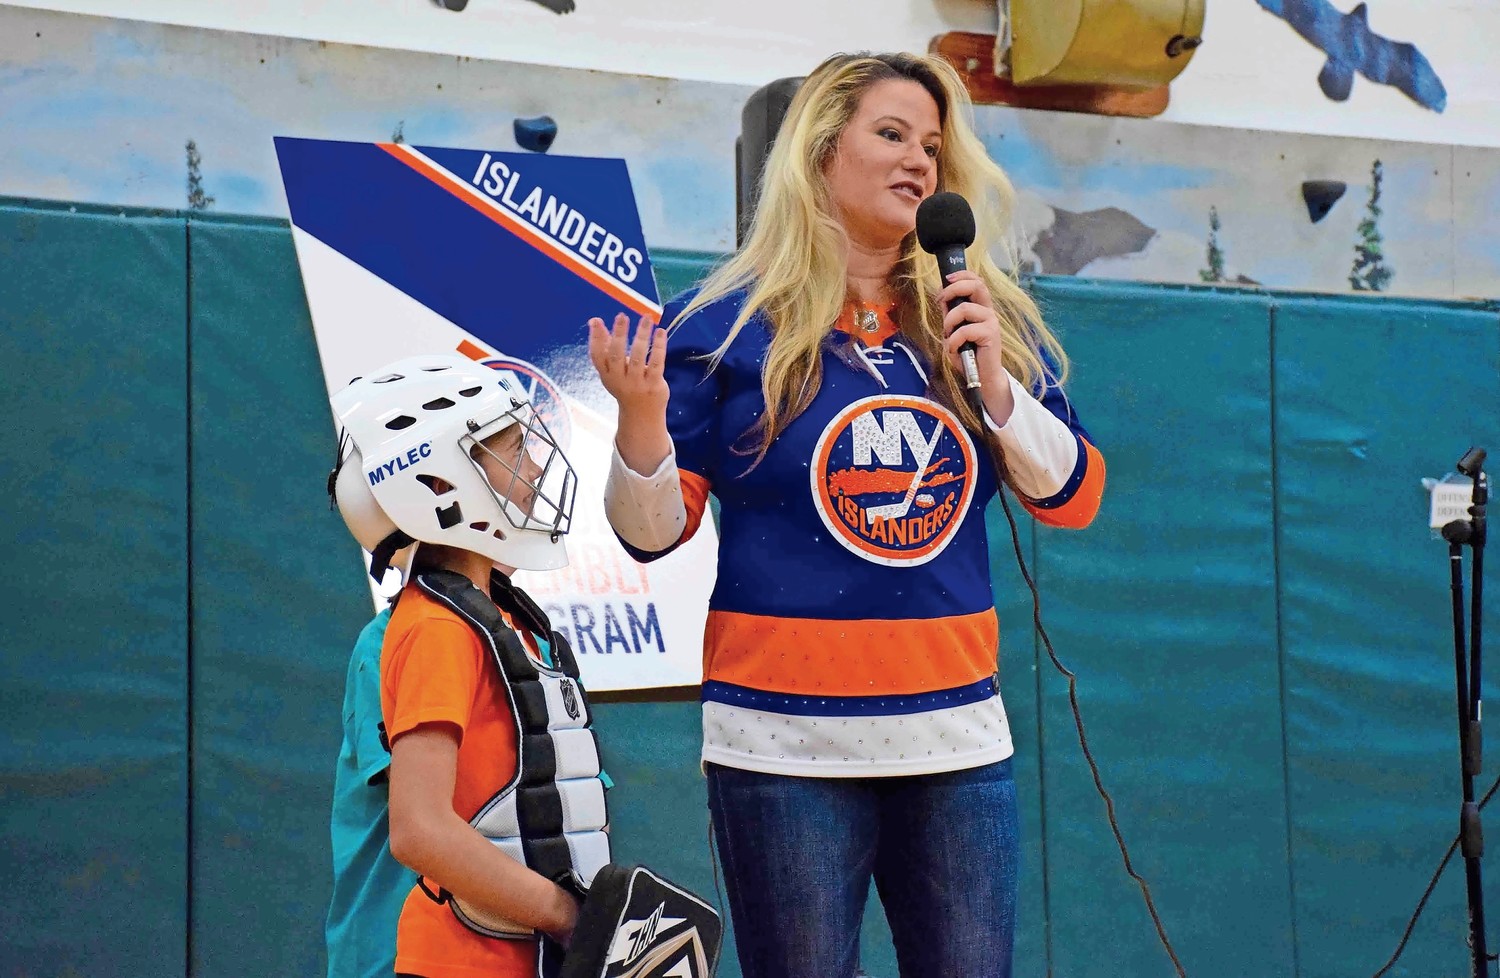 Dina Tsiorvas, a representative from the New York Islanders, spoke about teamwork while third-grader Victoria Boccil looked on.